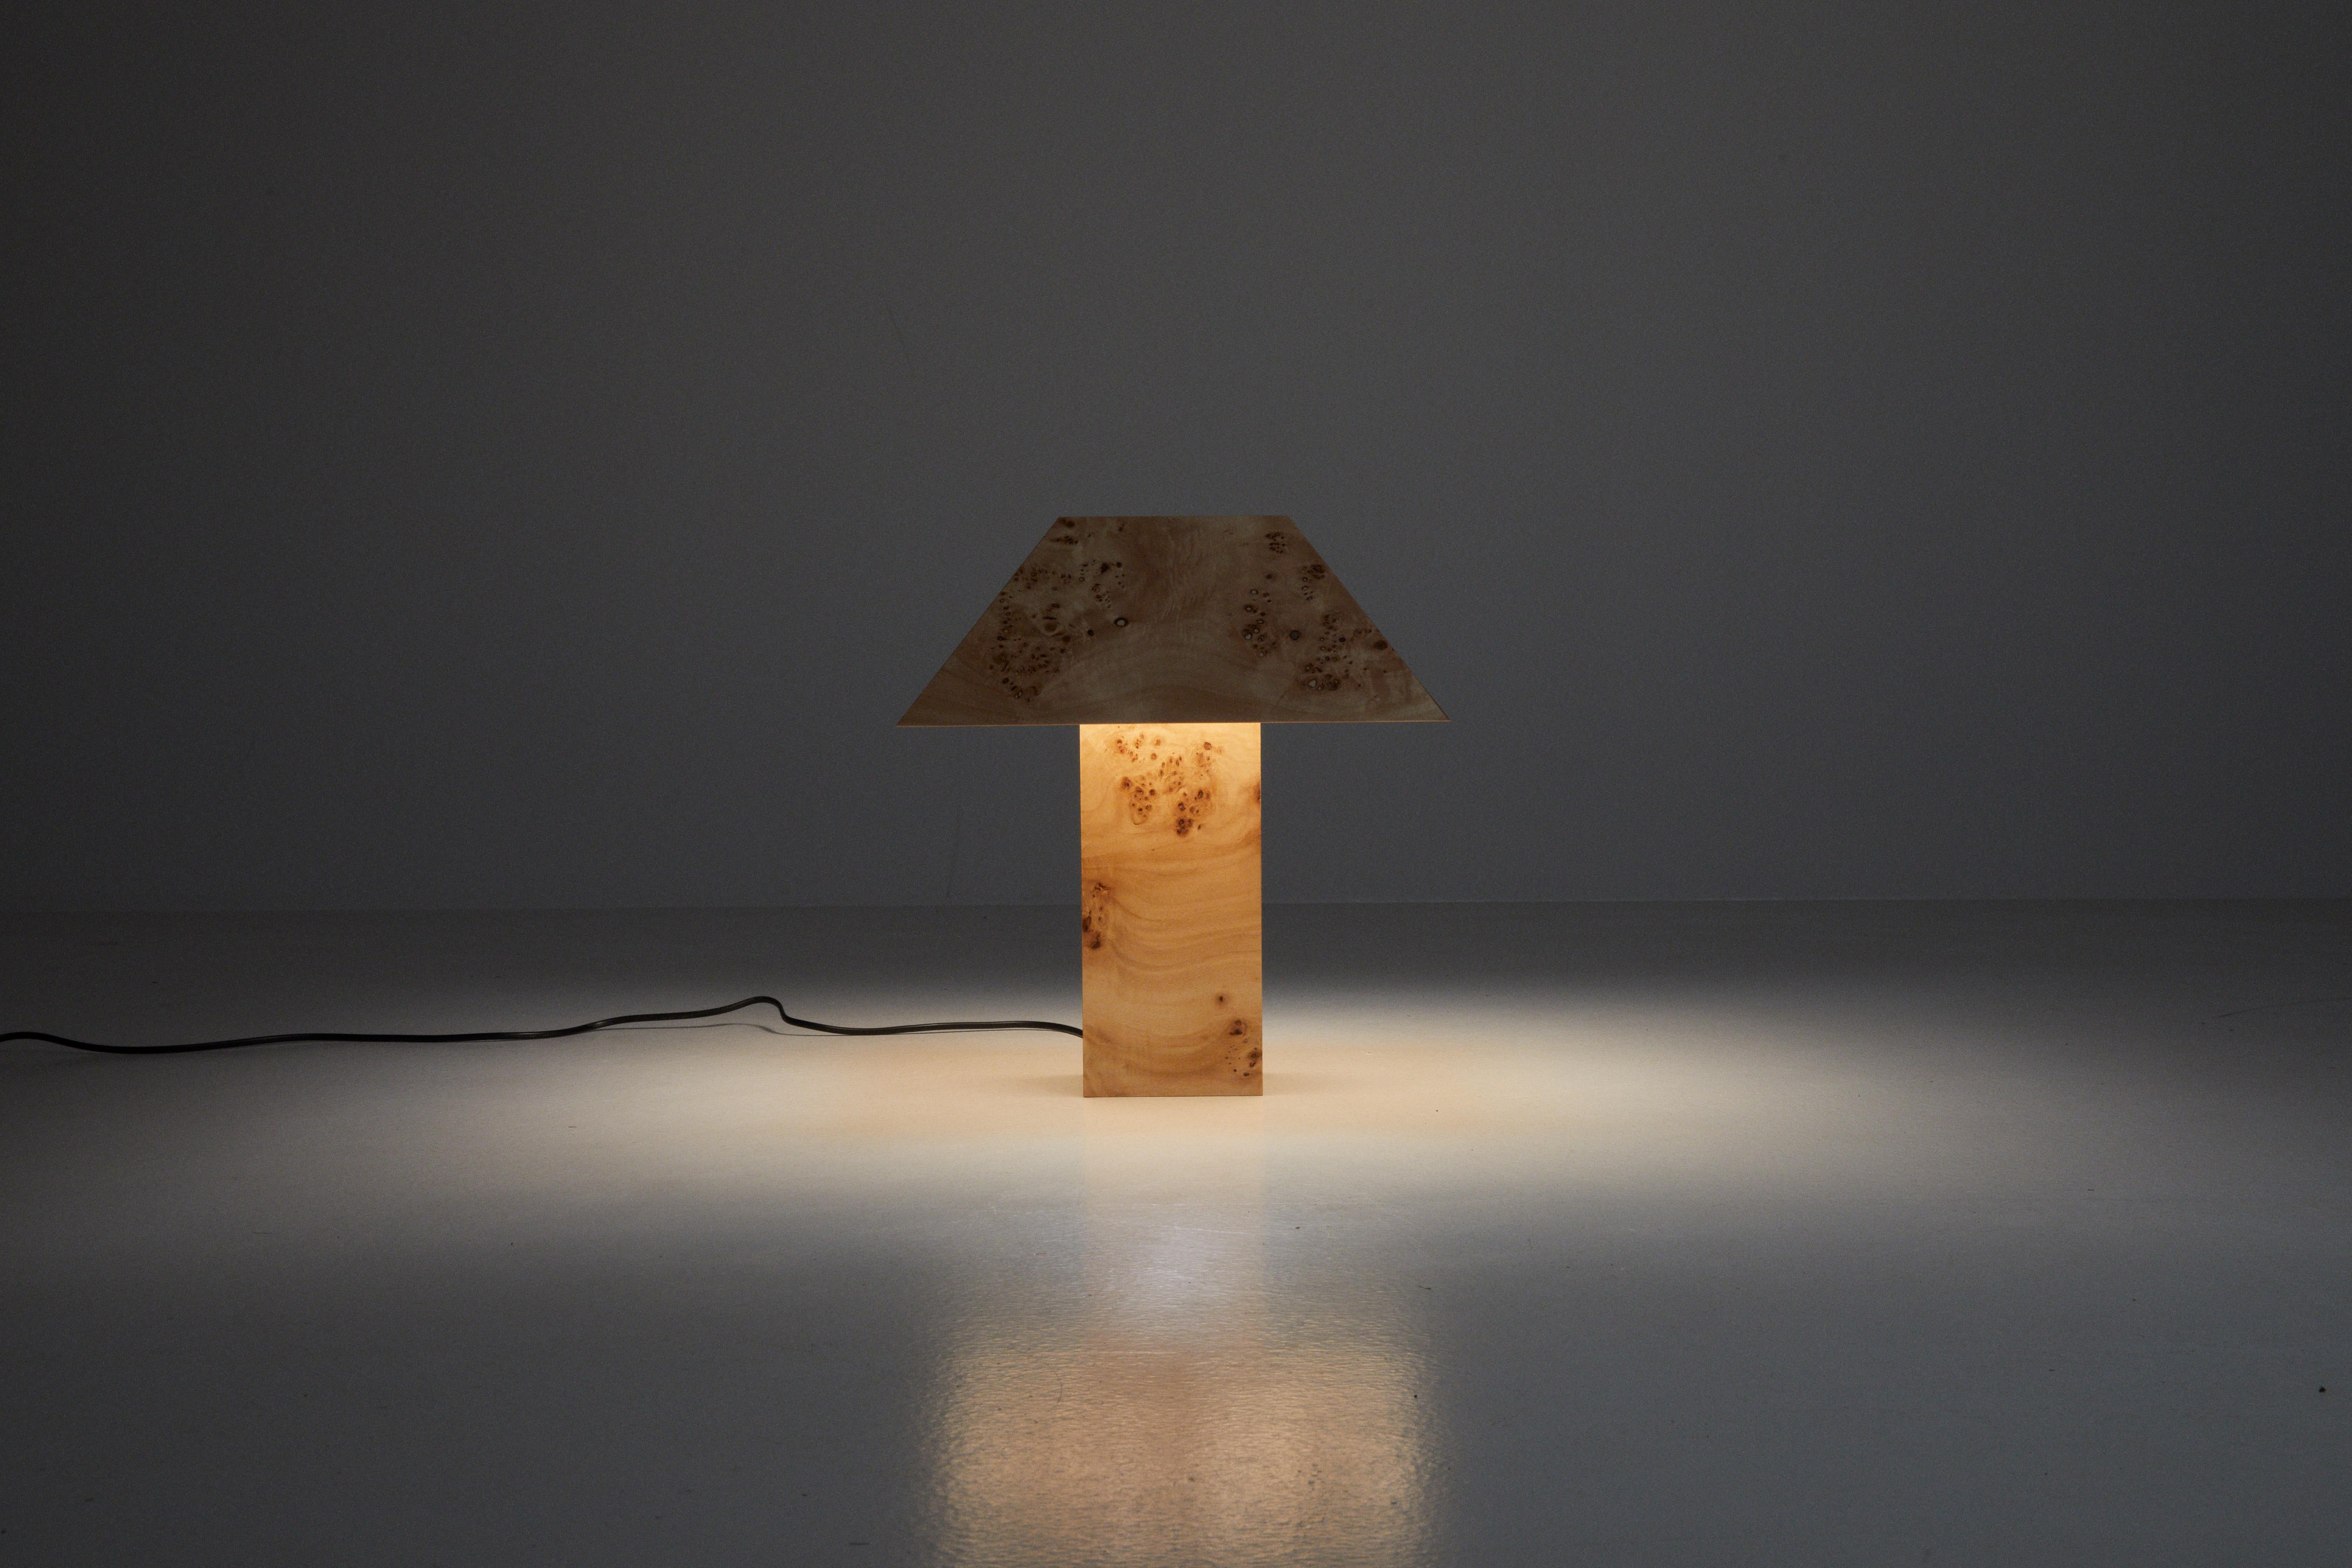 Lamp 53 - Mappa Burl

Drawing inspiration from 70s cork lamps, this piece is uniquely characterized by a 53-degree angle, from which it derives its name.

This unique angle serves as the focal point, showcasing a meticulous exploration of angles and